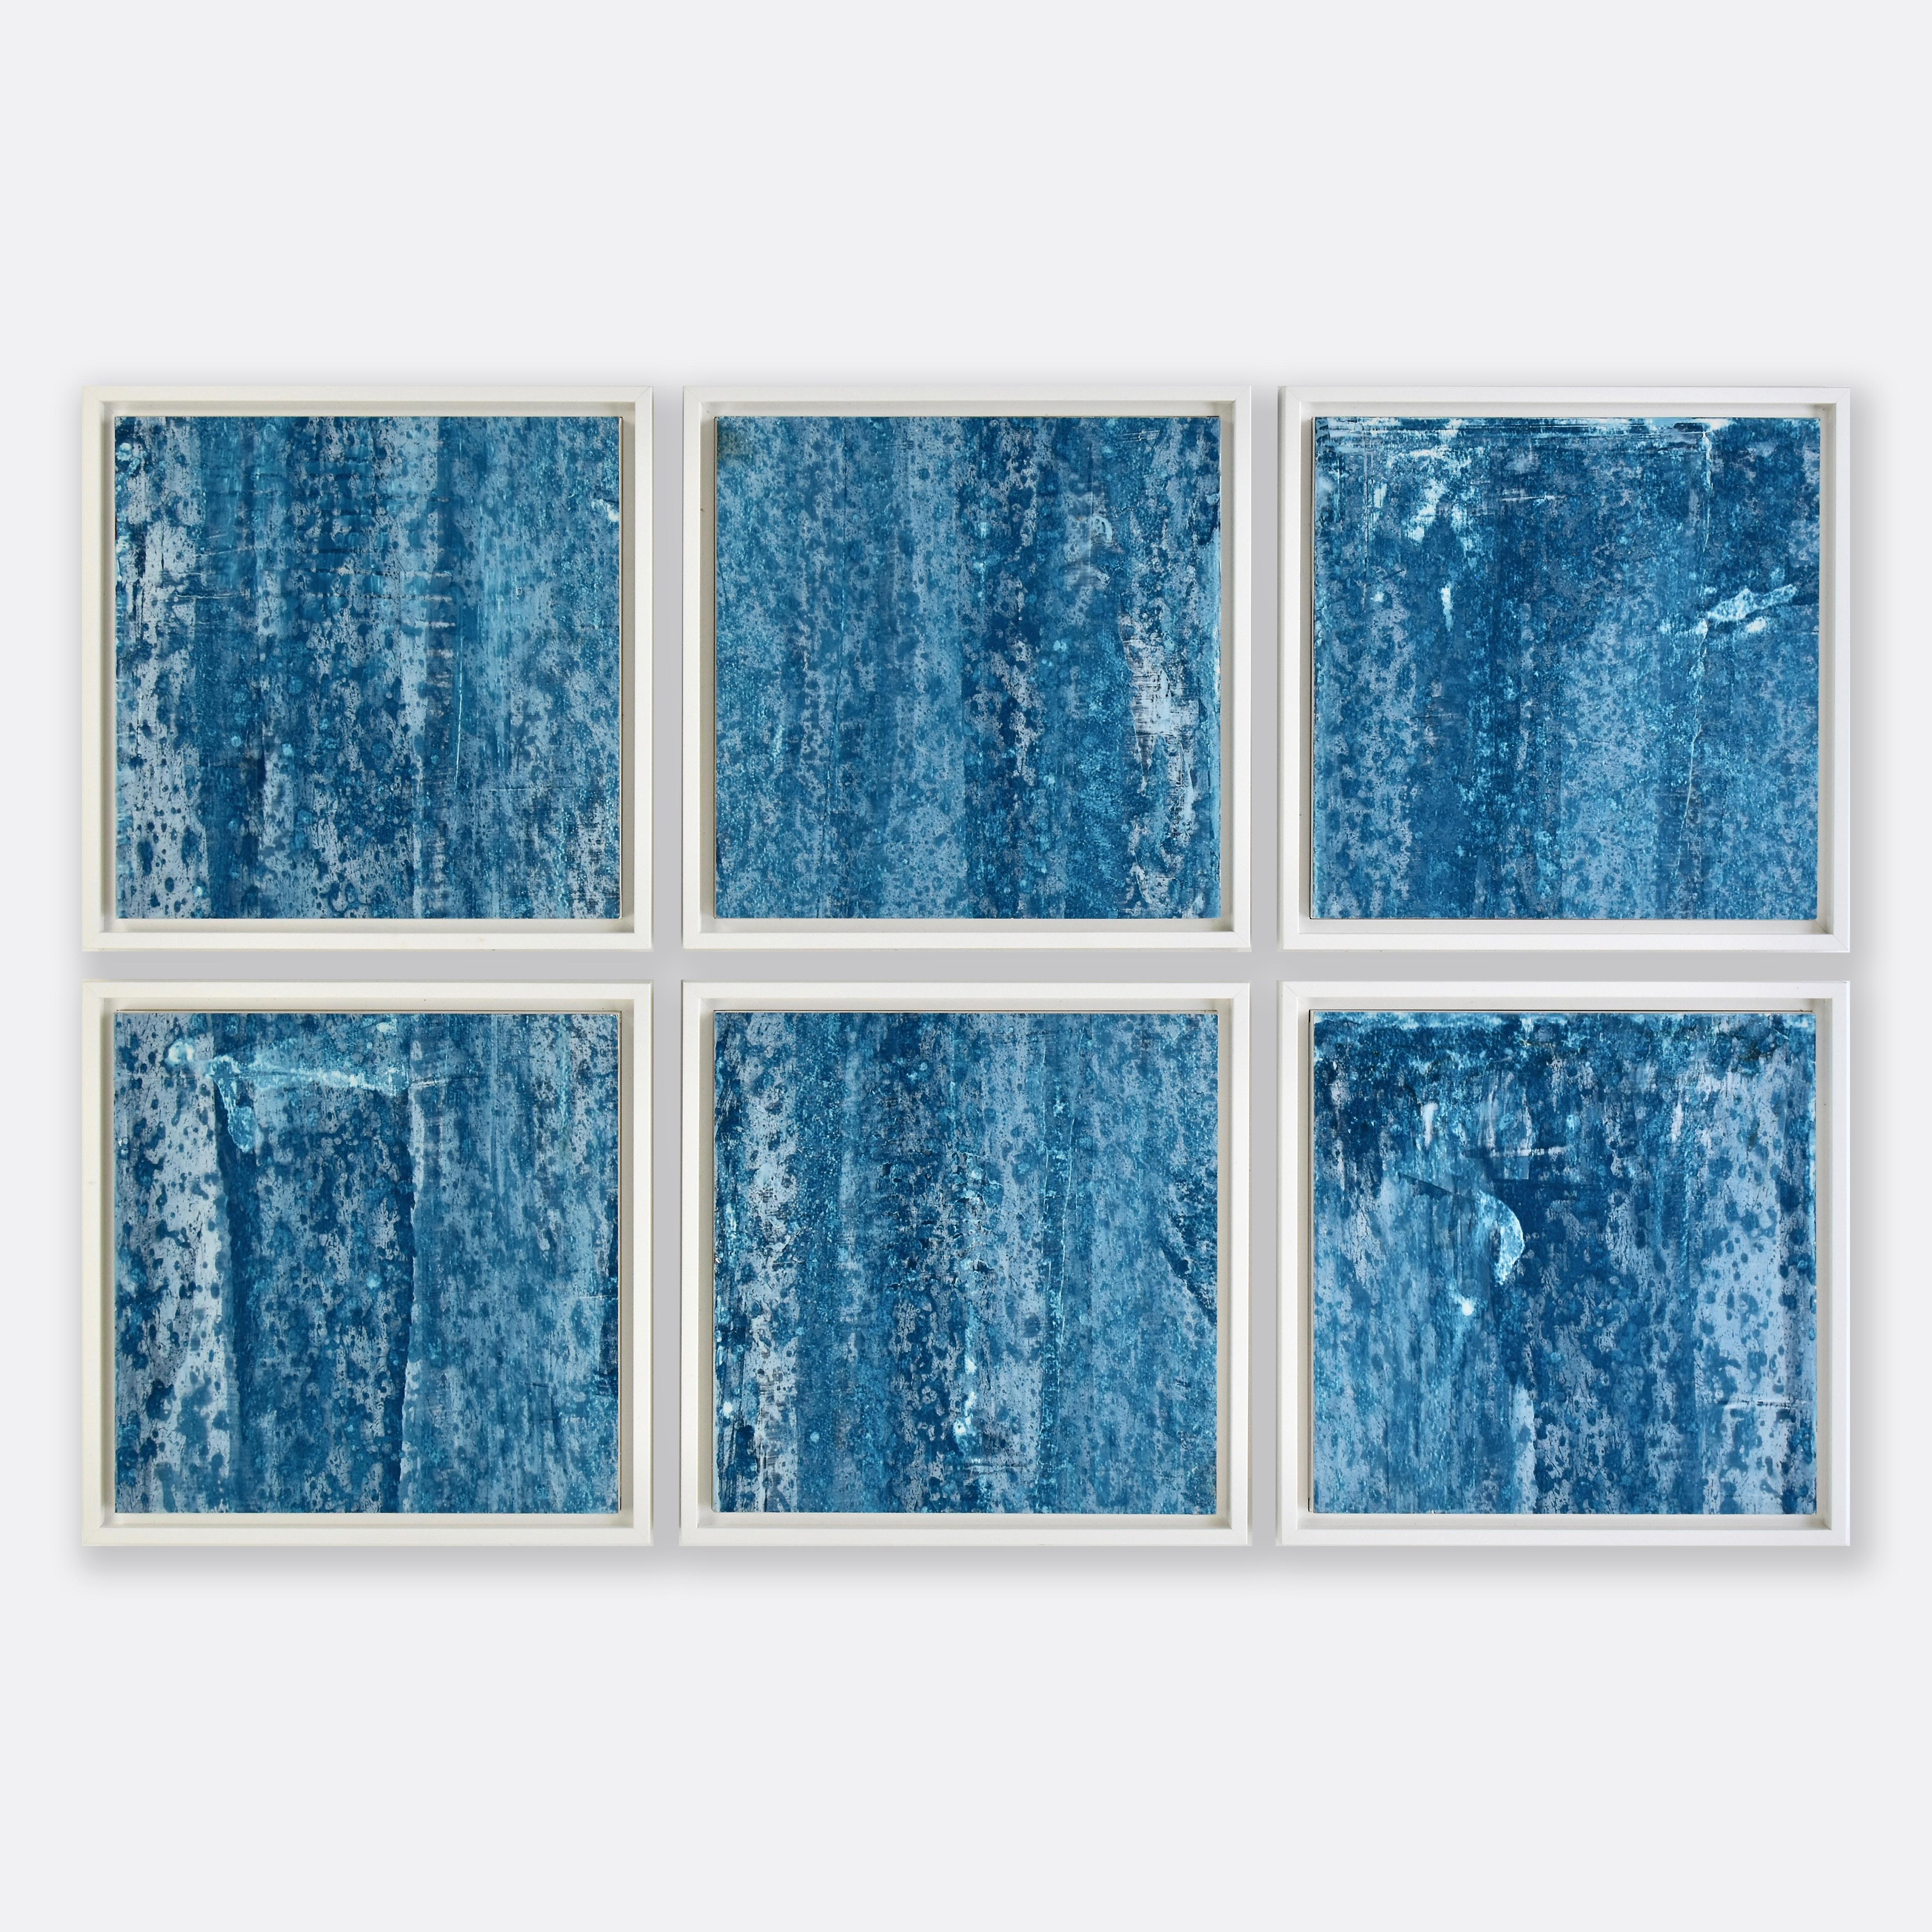 Bless - framed 6 piece blue abstract plaster and acrylic painting 